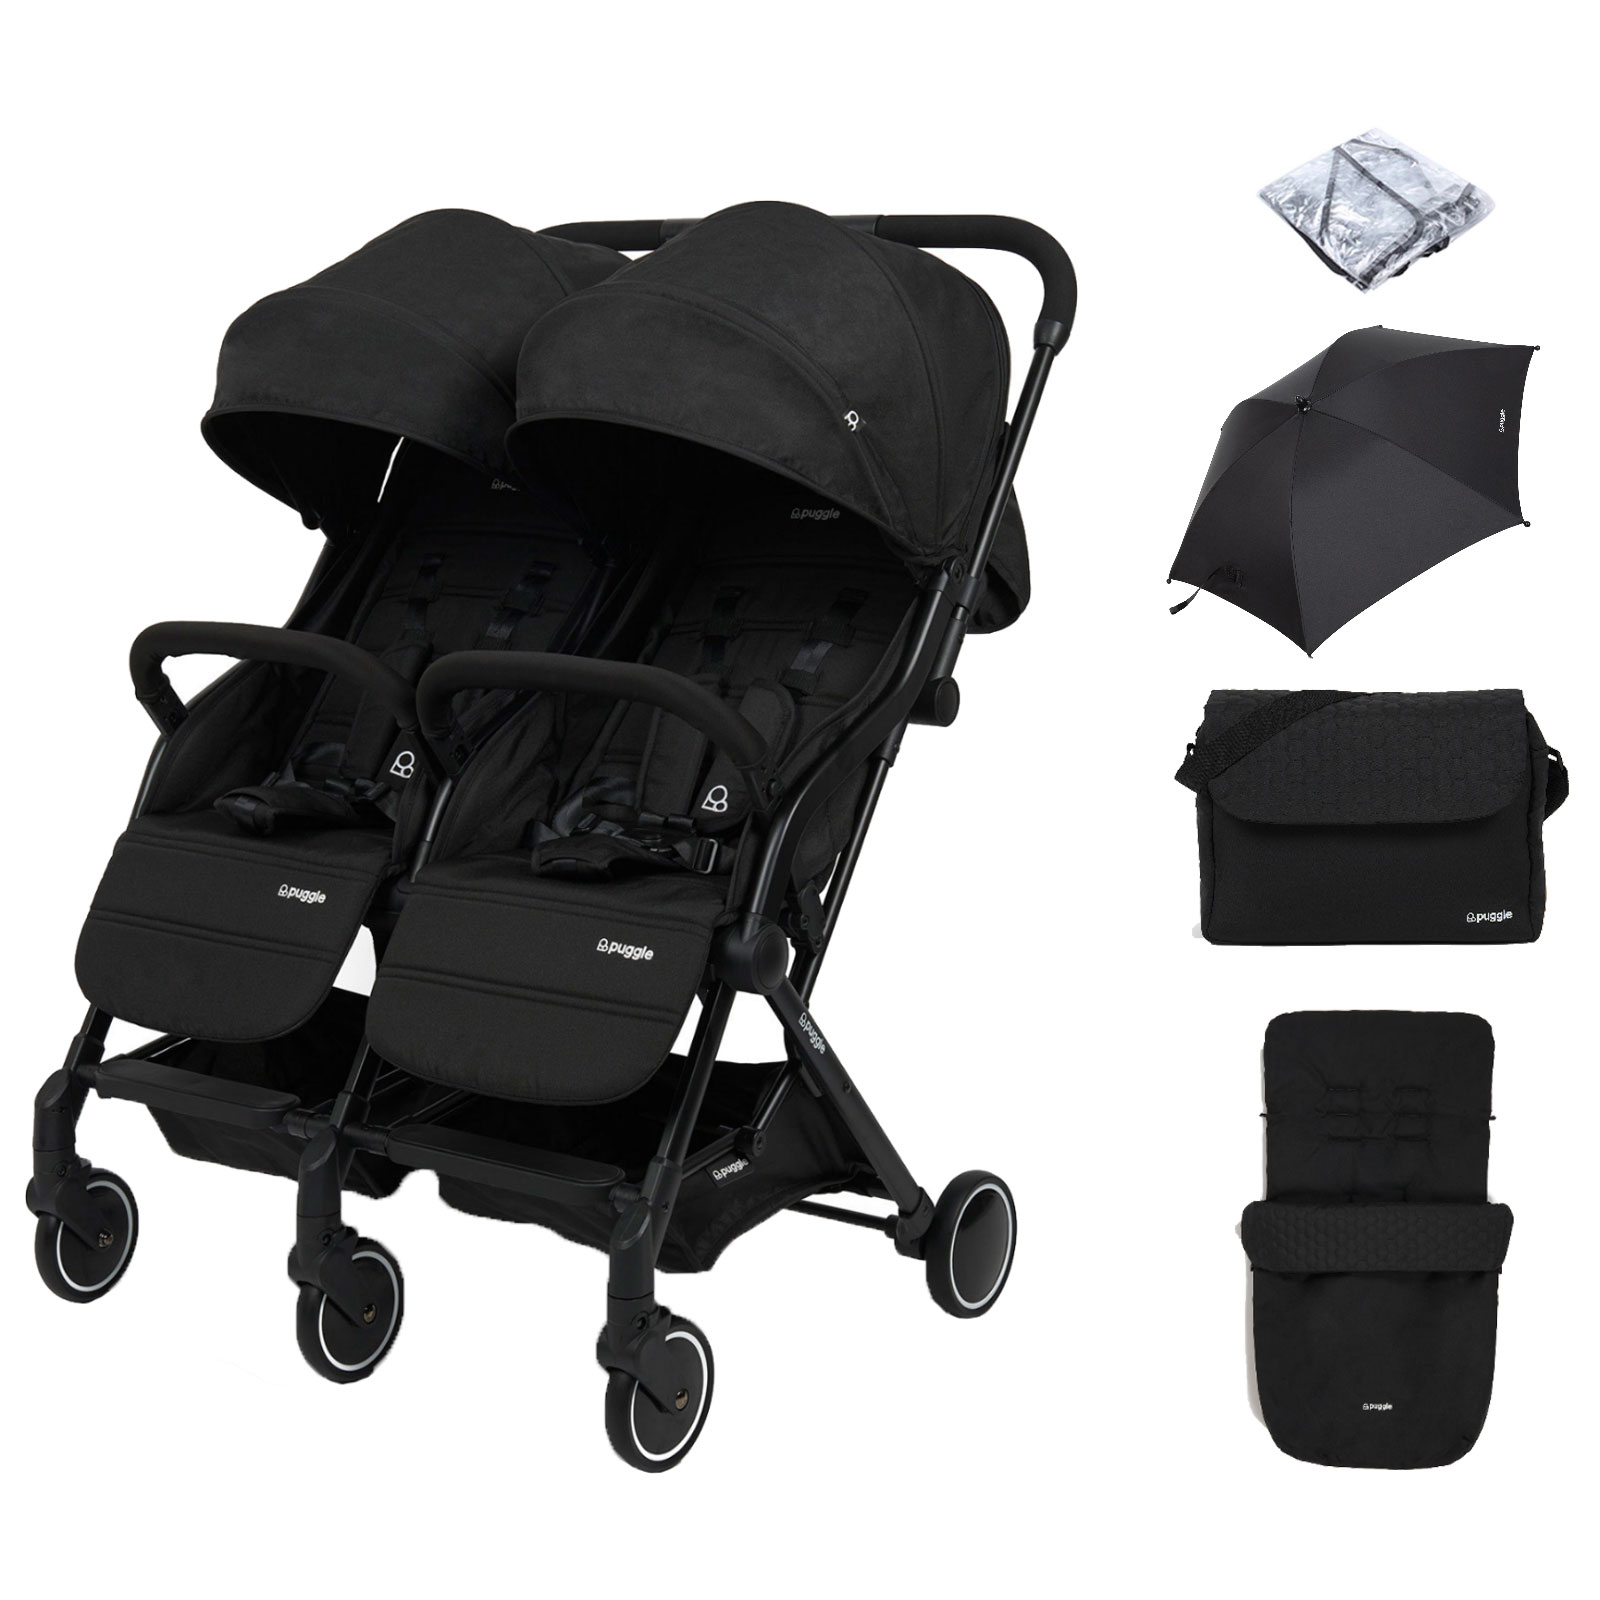 Puggle City Traveller Compact Fold Twin Pushchair with Footmuff, Parasol & Changing Bag – Storm Black